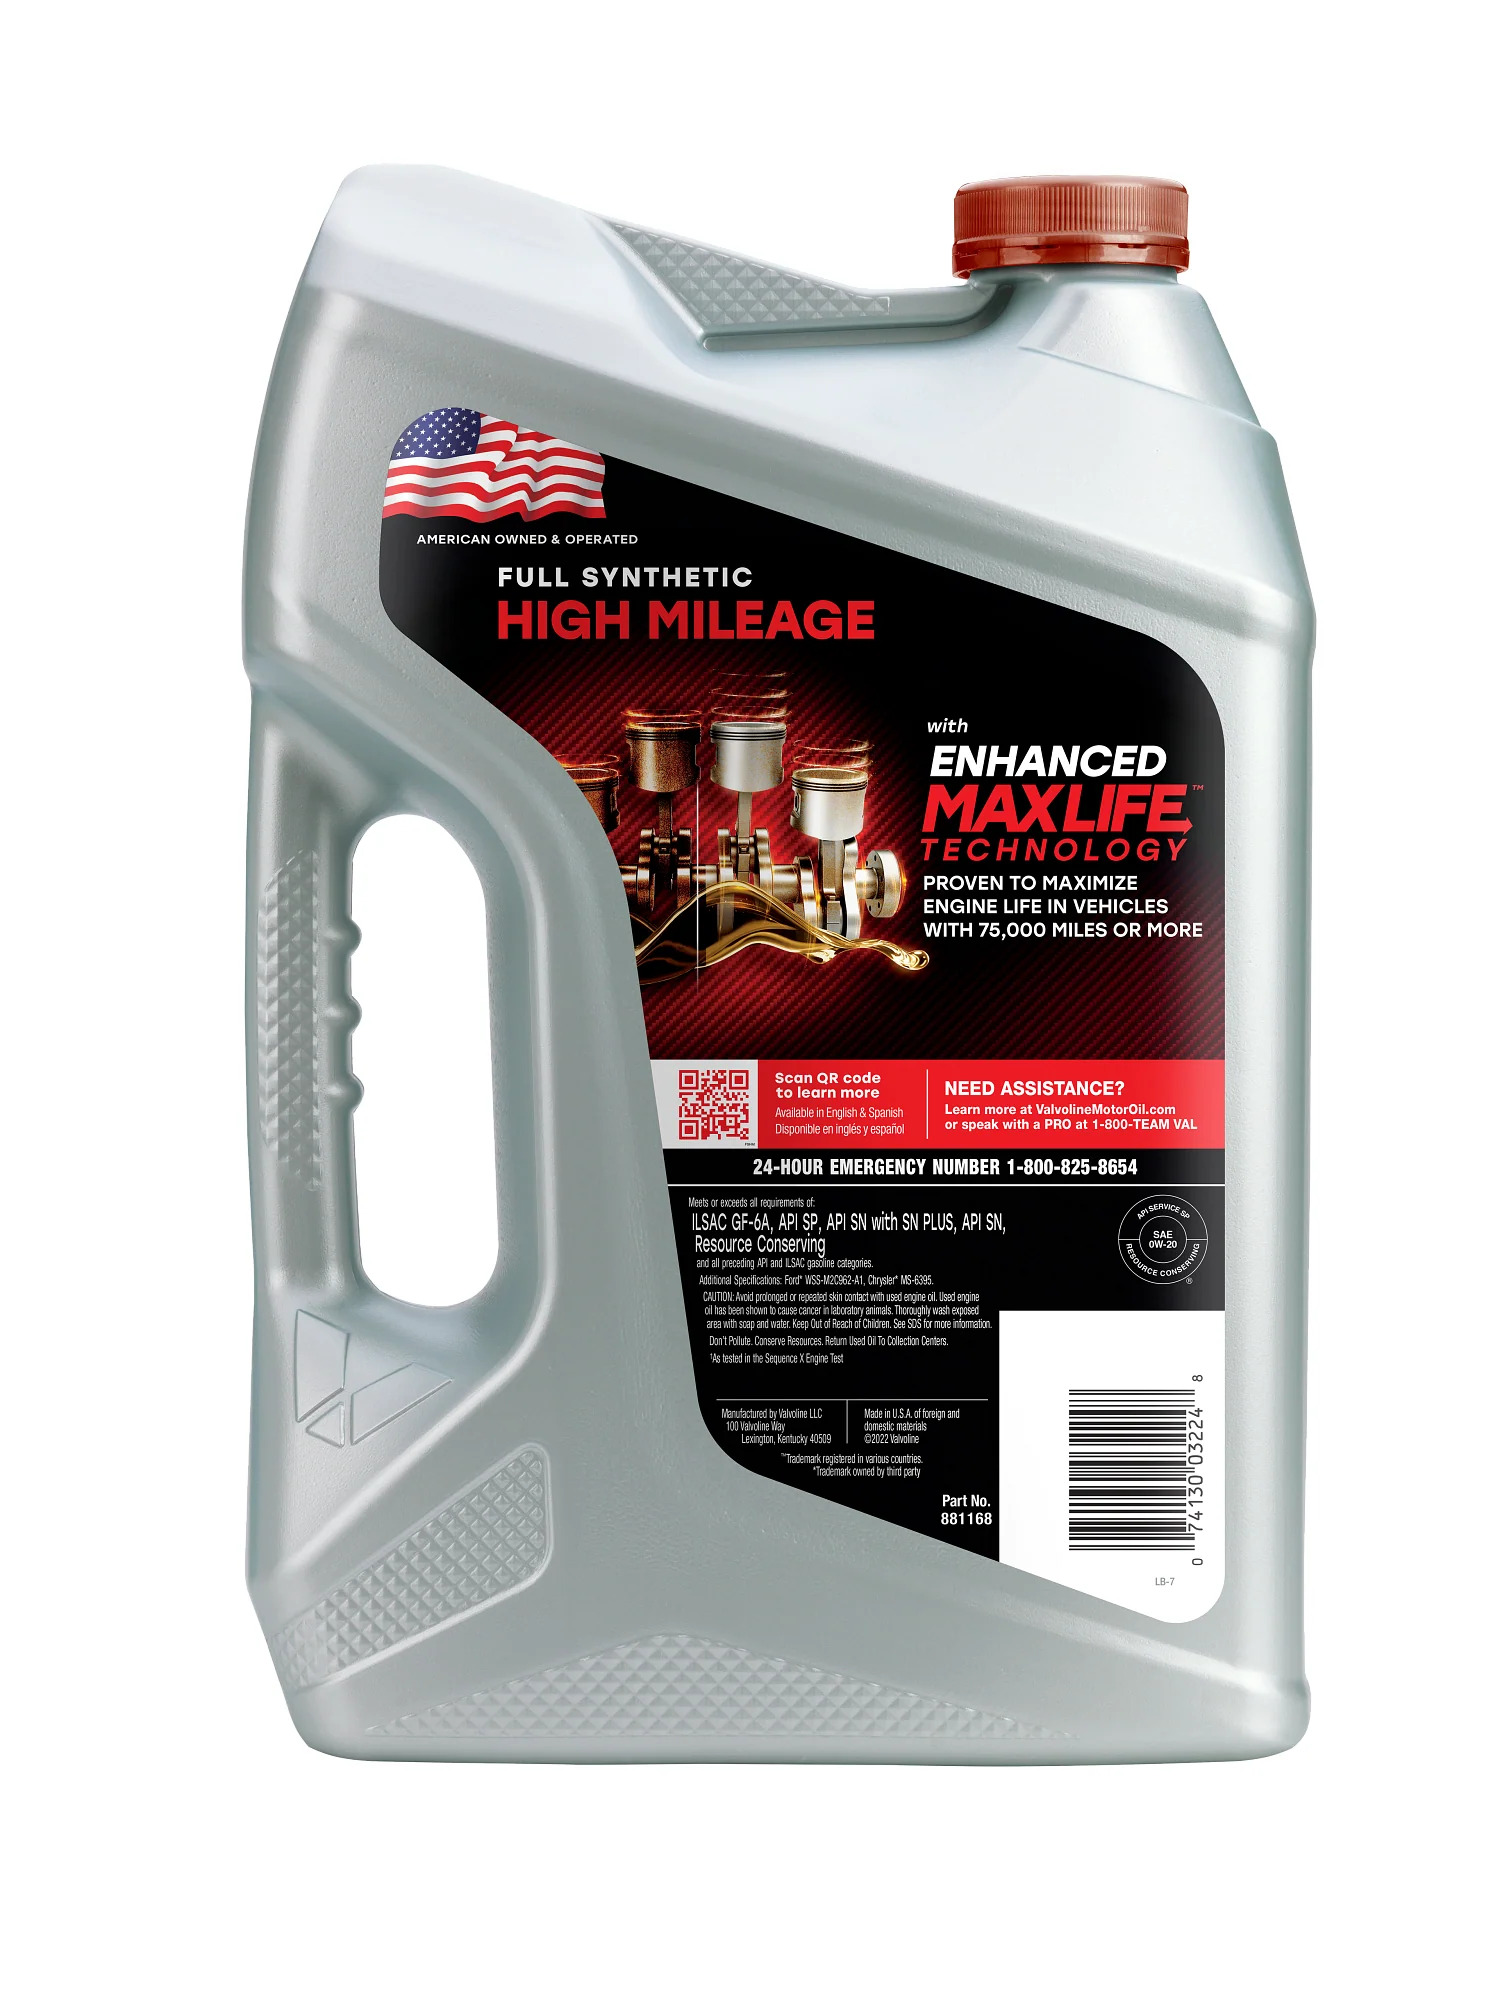 Valvoline Full Synthetic High Mileage with MaxLife Technology Motor Oil SAE 0W-20 - image 3 of 11